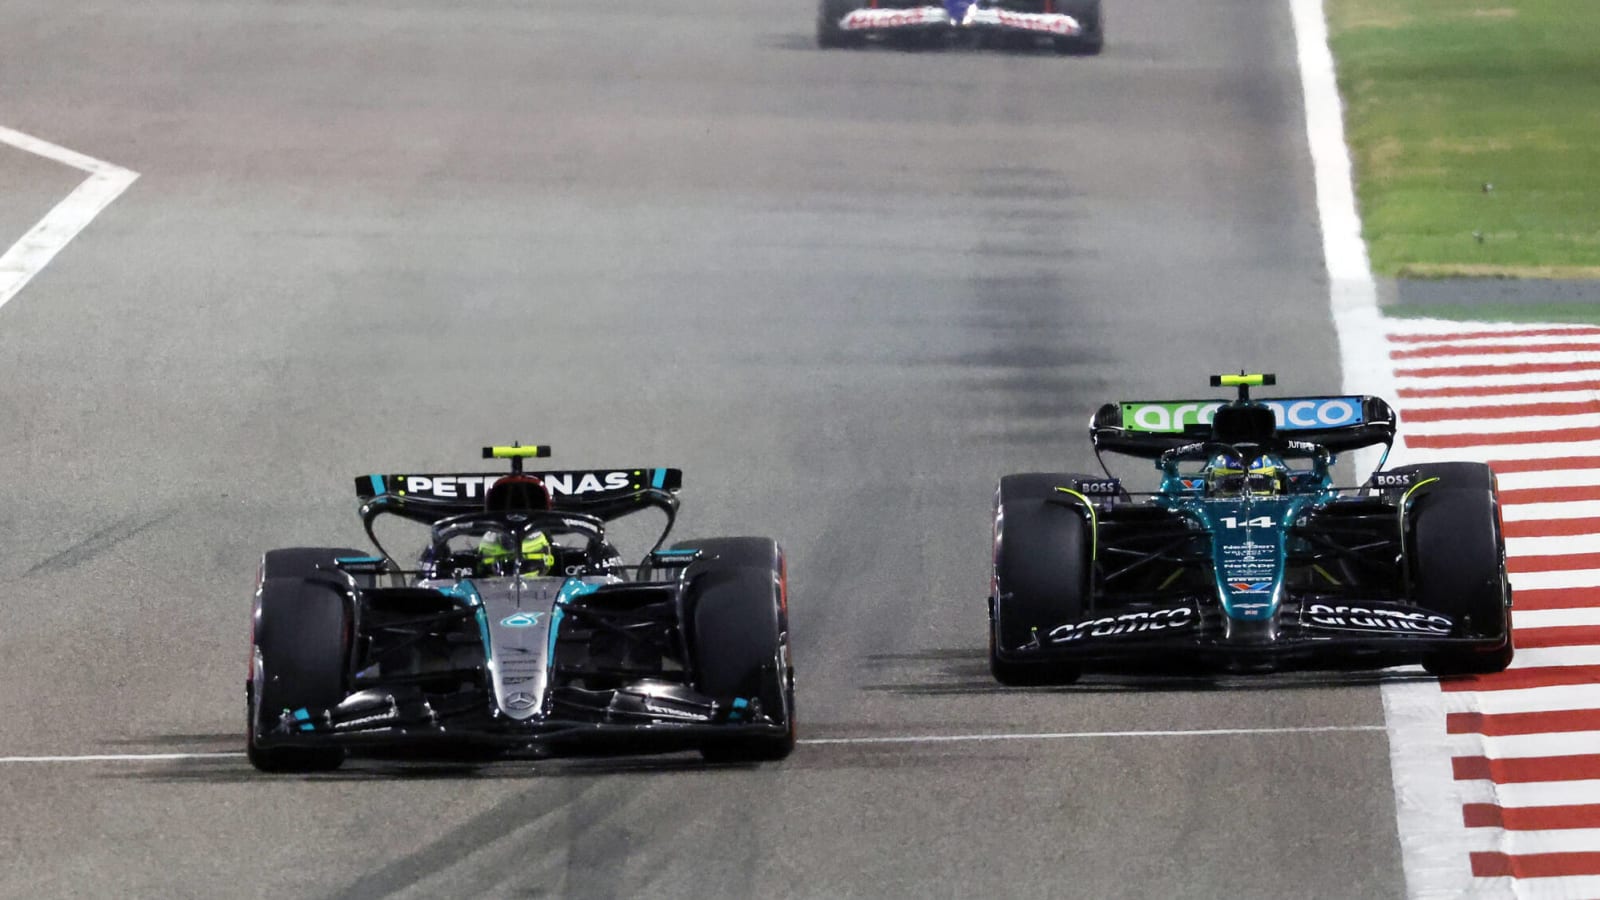 Lewis Hamilton’s secured a ‘disappointing’ P7 with a broken seat at the Bahrain GP